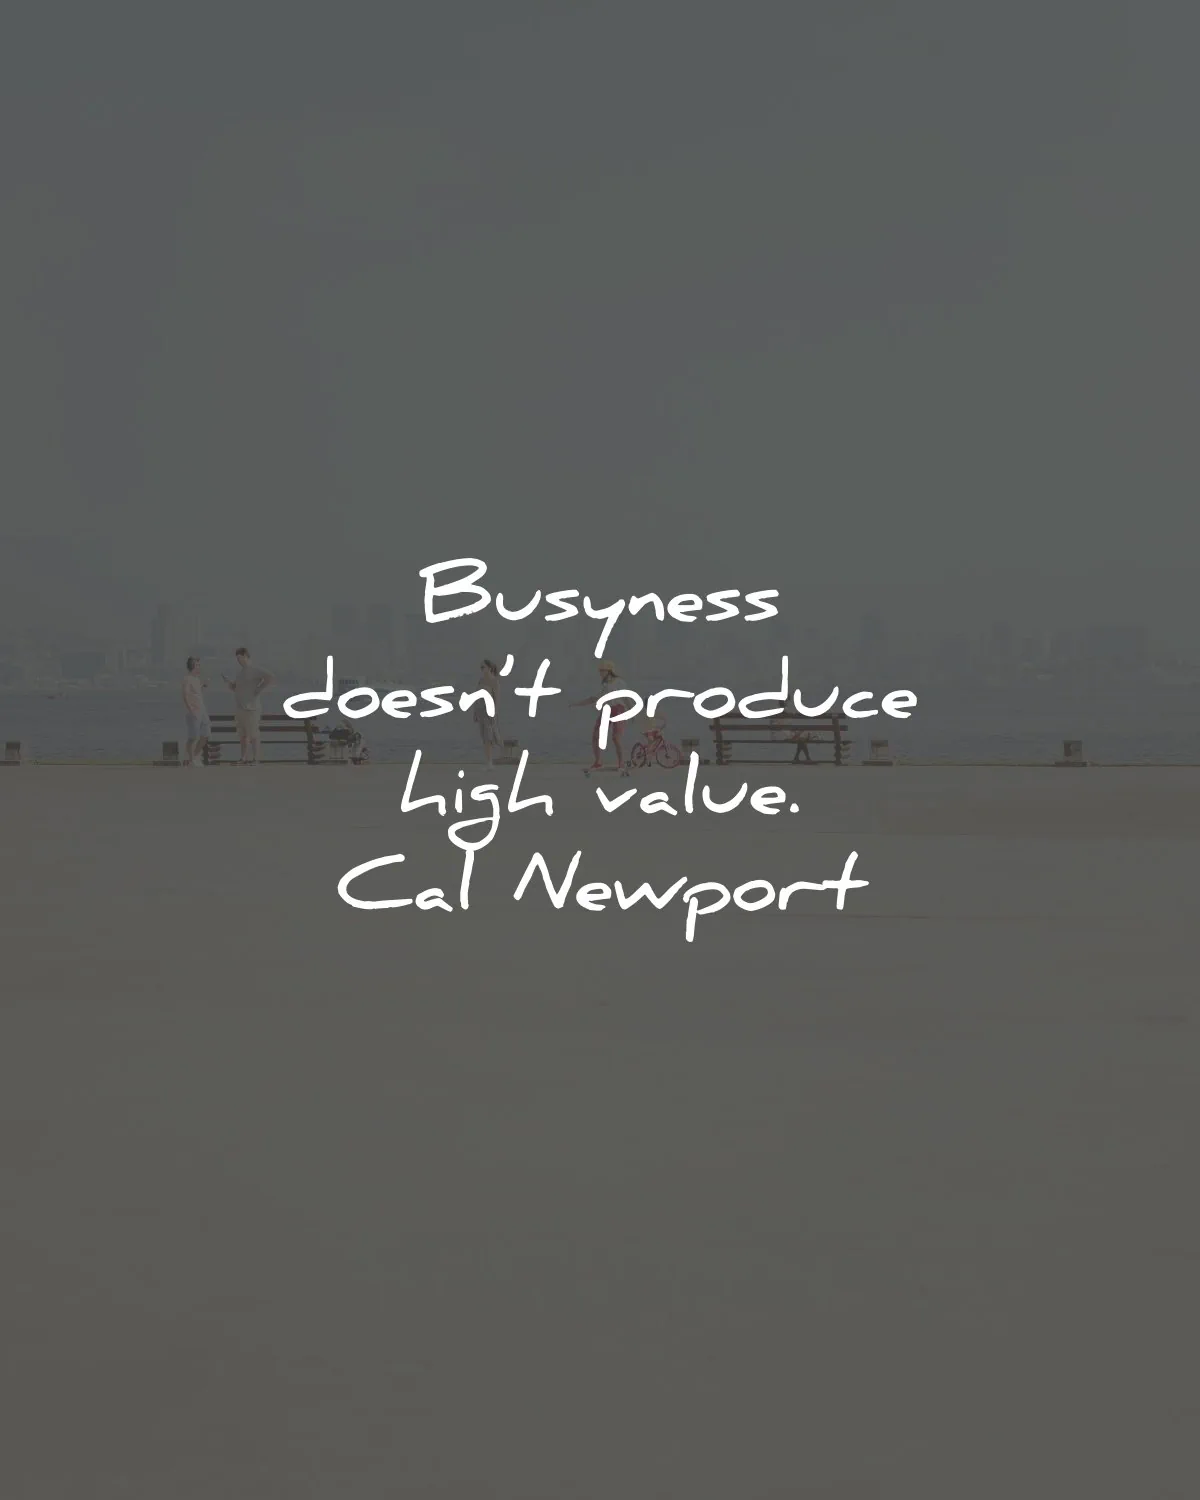 cal newport quotes busyness produce value wisdom